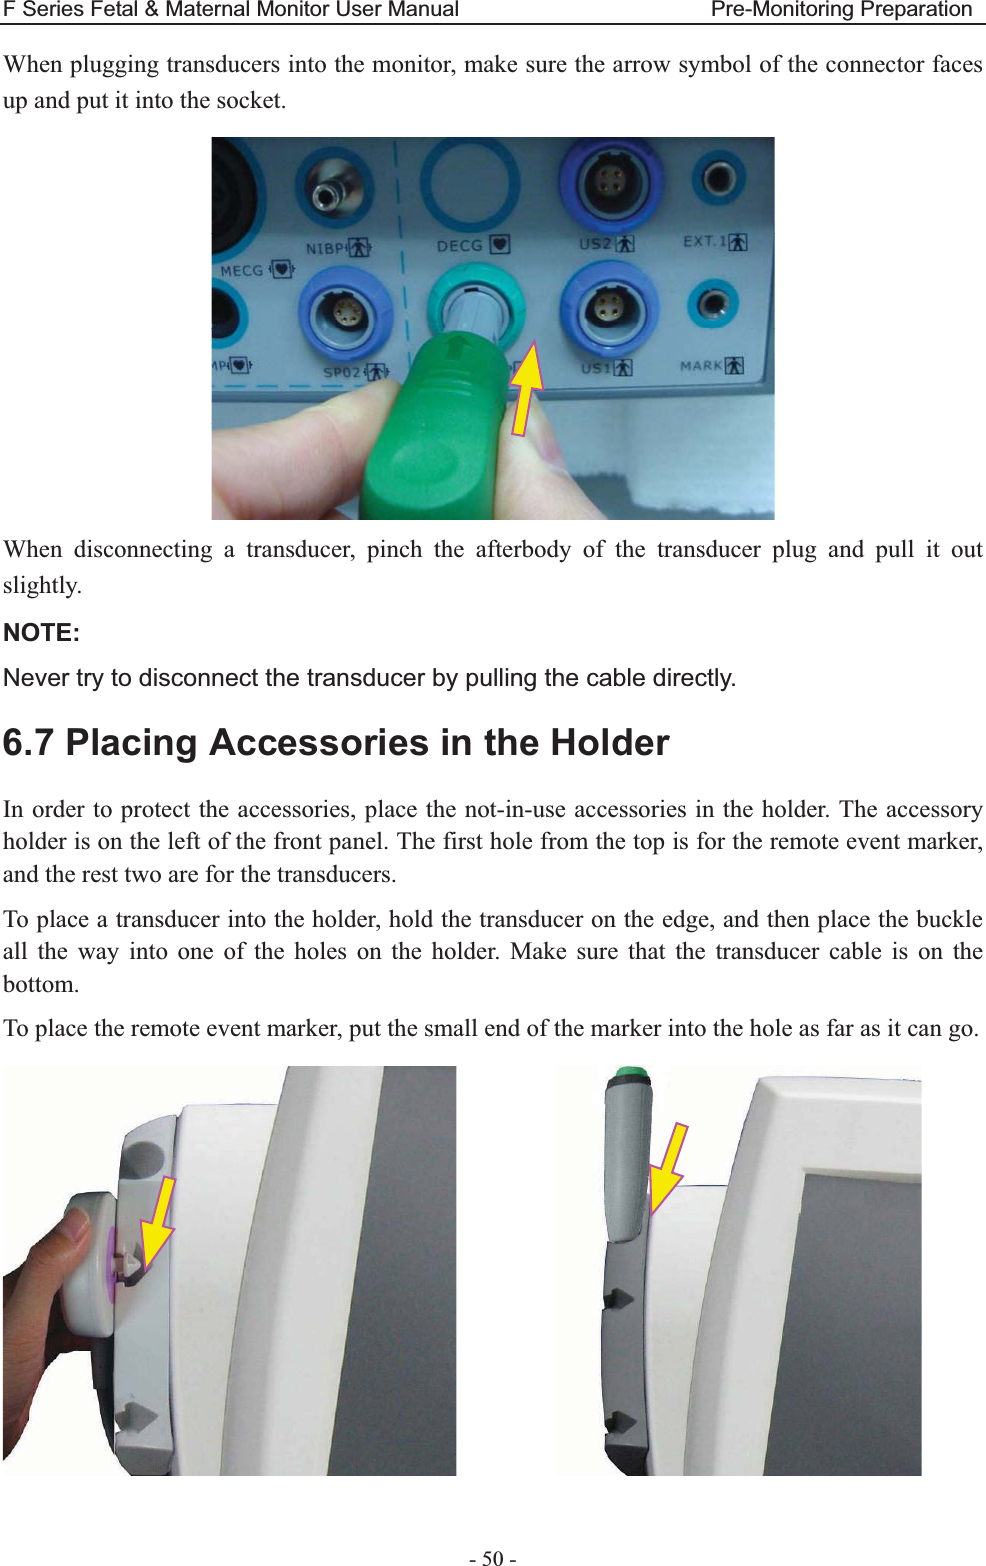 F Series Fetal &amp; Maternal Monitor User Manual                       Pre-Monitoring Preparation - 50 - When plugging transducers into the monitor, make sure the arrow symbol of the connector faces up and put it into the socket.  When disconnecting a transducer, pinch the afterbody of the transducer plug and pull it out slightly. NOTE:Never try to disconnect the transducer by pulling the cable directly. 6.7 Placing Accessories in the Holder In order to protect the accessories, place the not-in-use accessories in the holder. The accessory holder is on the left of the front panel. The first hole from the top is for the remote event marker, and the rest two are for the transducers. To place a transducer into the holder, hold the transducer on the edge, and then place the buckle all the way into one of the holes on the holder. Make sure that the transducer cable is on the bottom. To place the remote event marker, put the small end of the marker into the hole as far as it can go.           